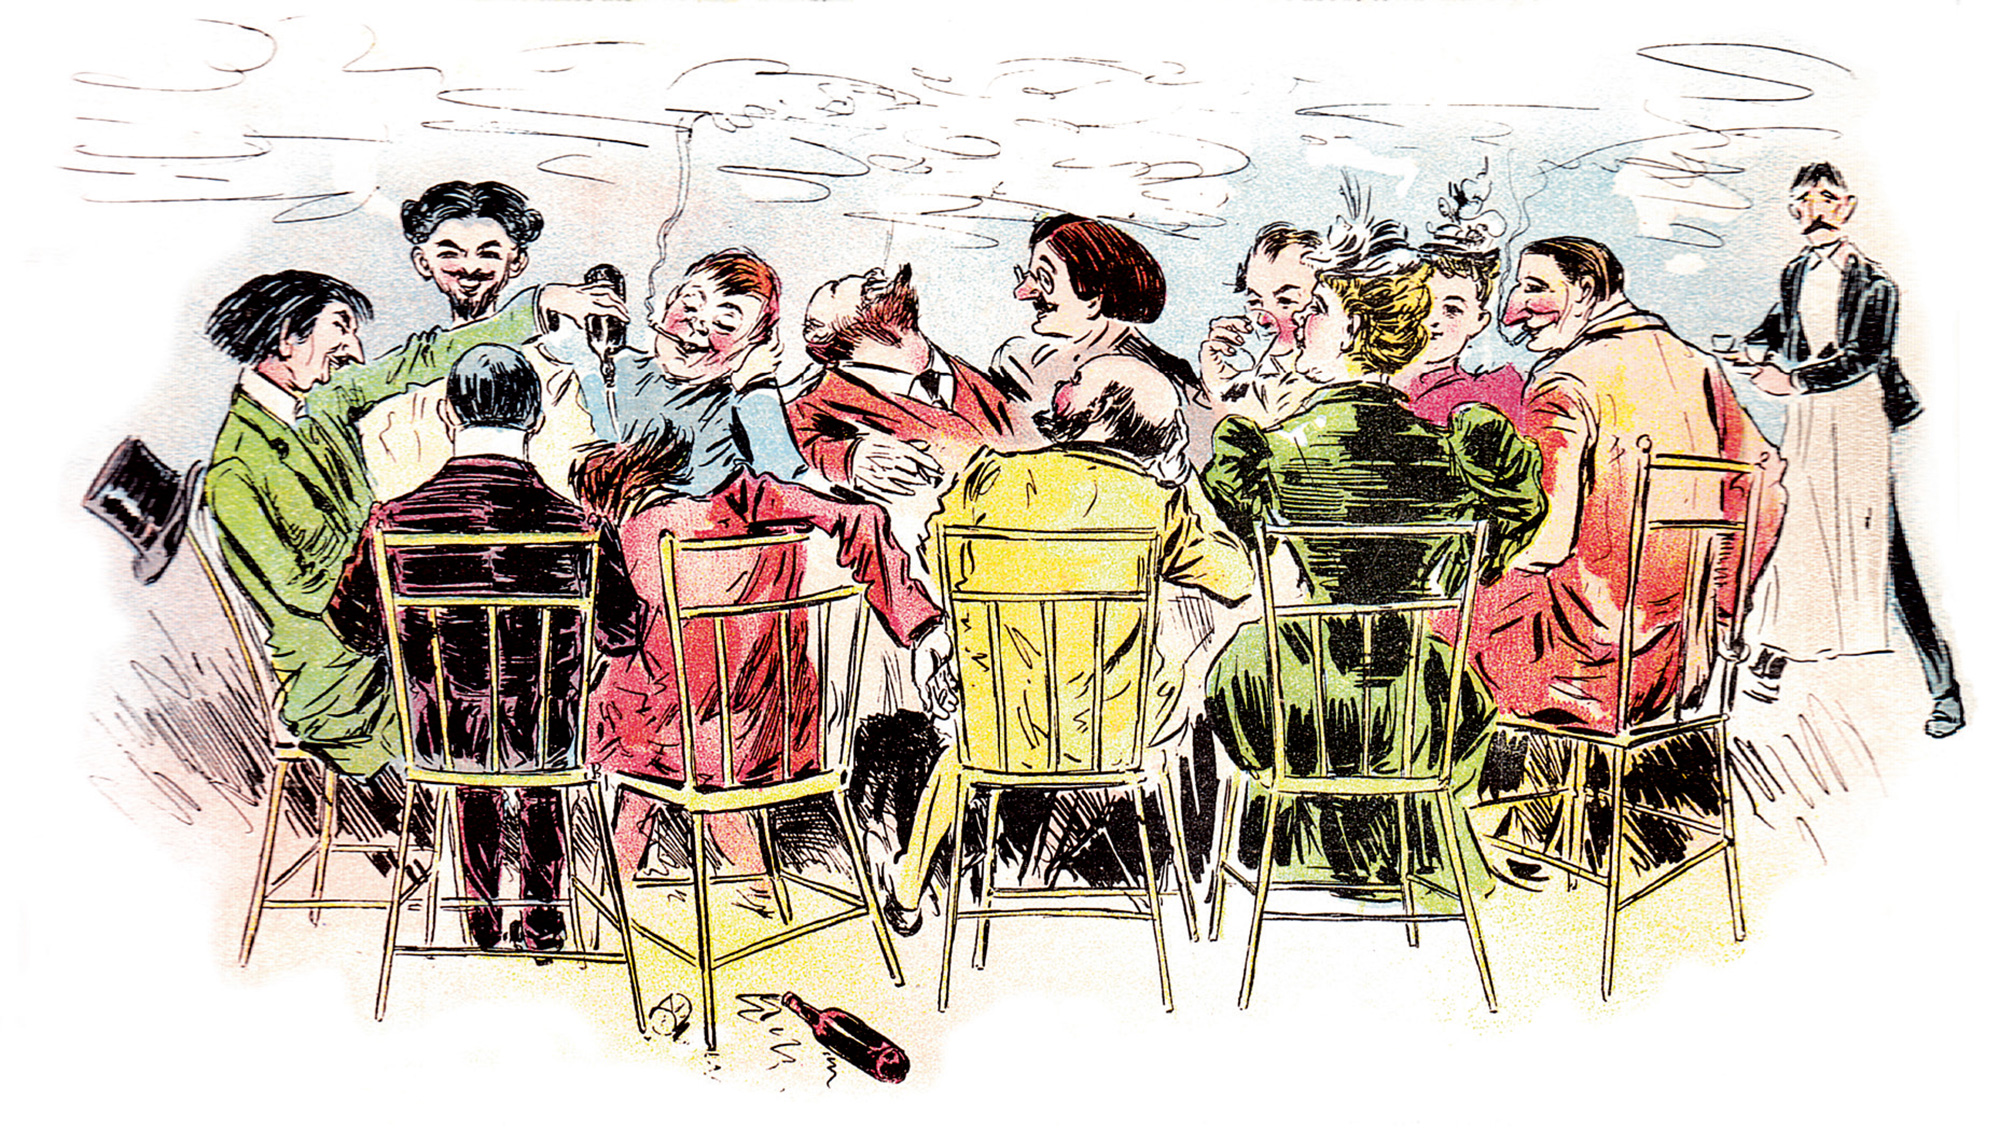 An eighteen ninety-three illustration of a dinner party by George Benjamin Luks for “Truth” magazine. The caption under the image reads: “The real Bohemians. They get the best table and service, for which most of them generally owe.”